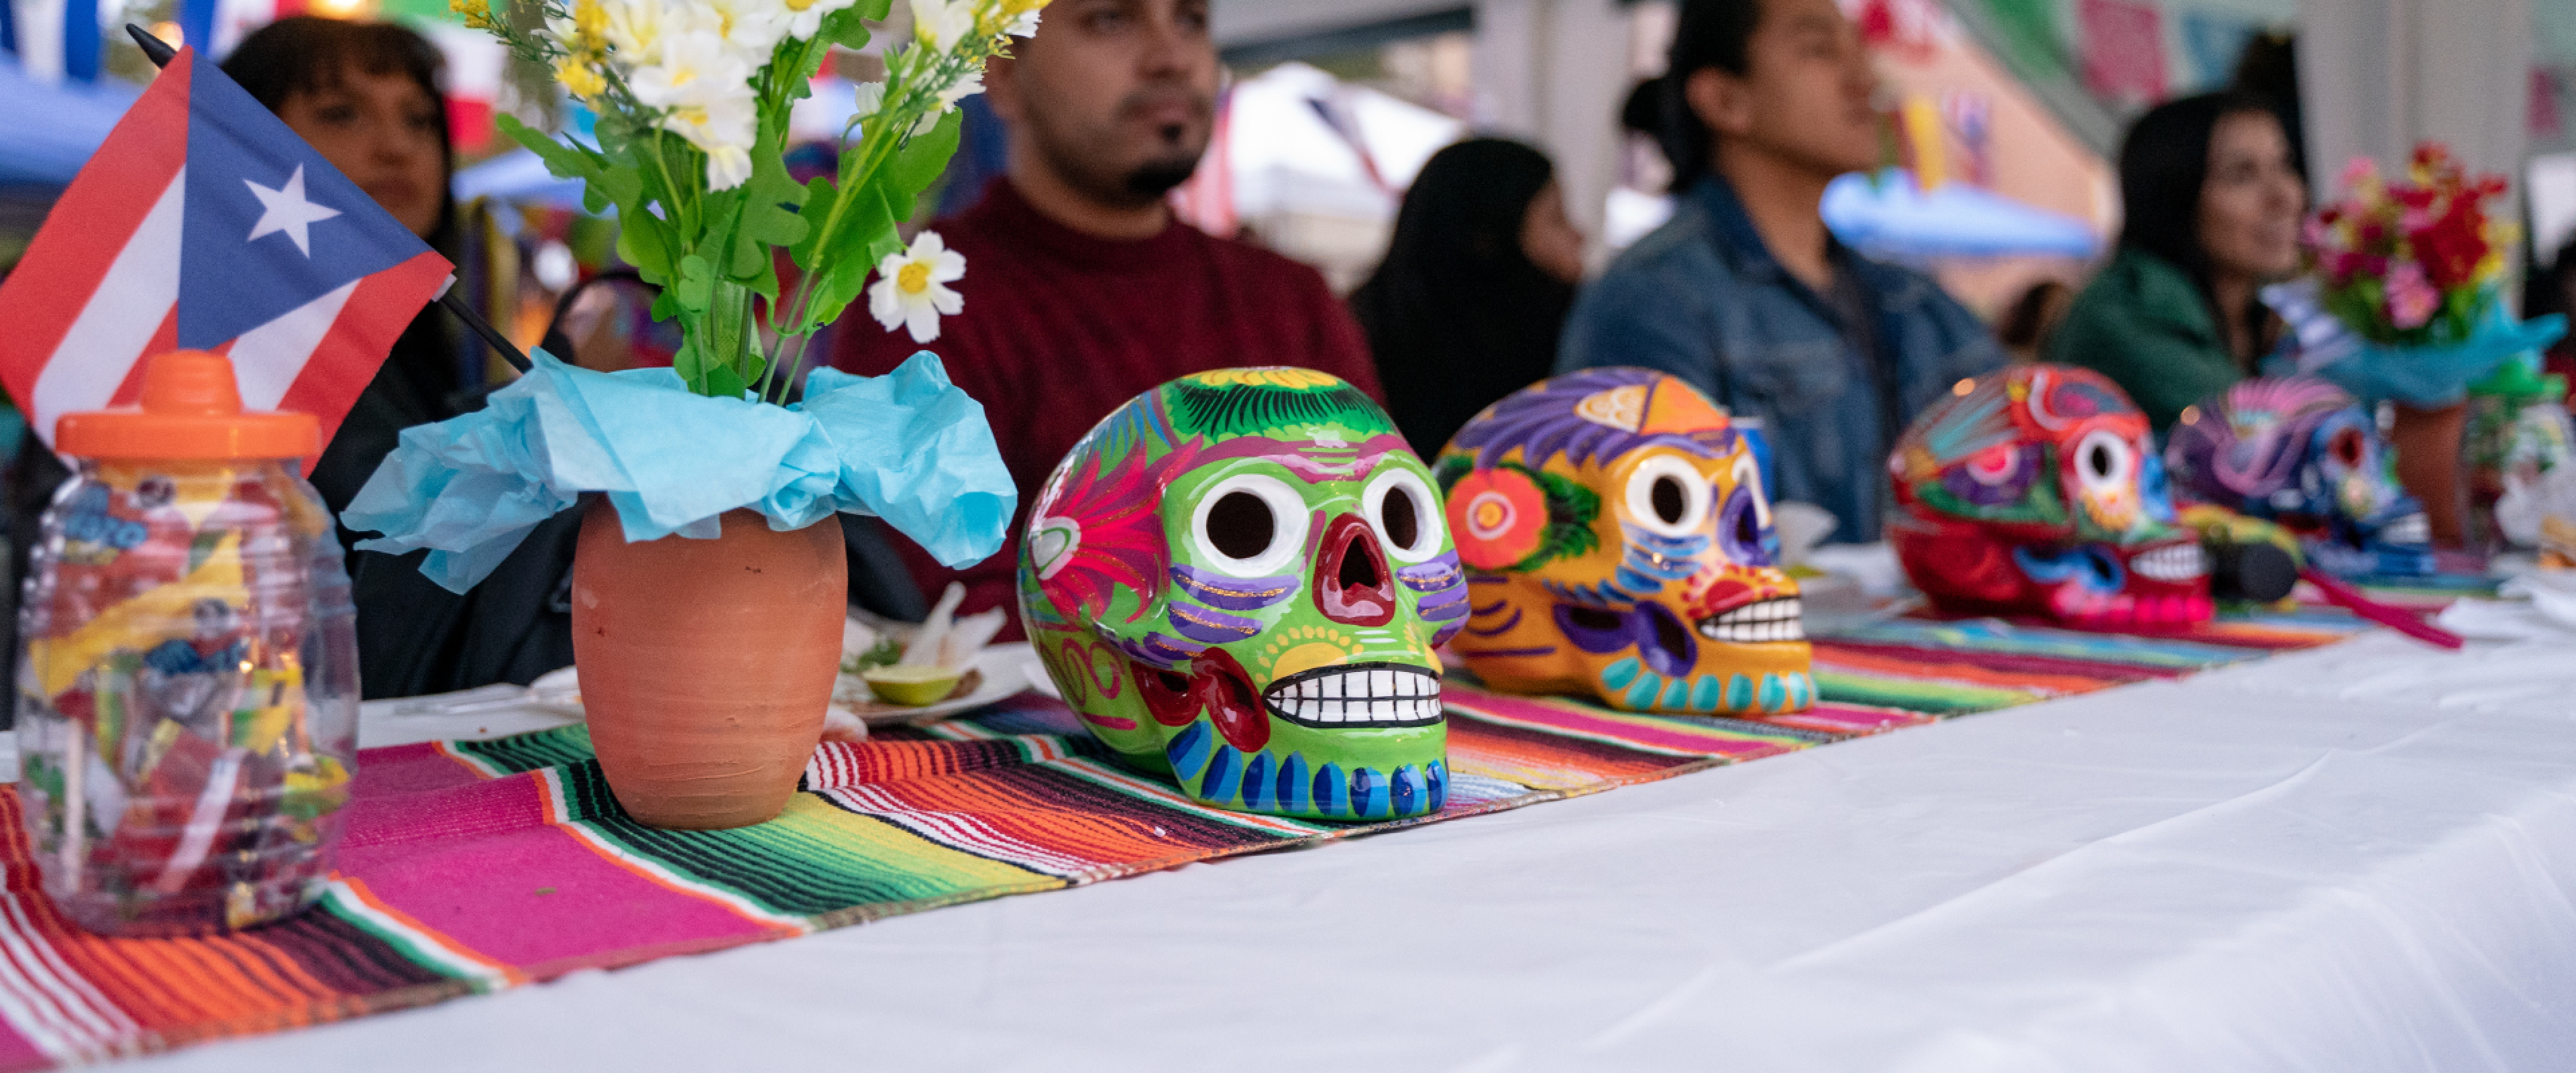 A row of four colorful Day of the Dead sugar skulls.